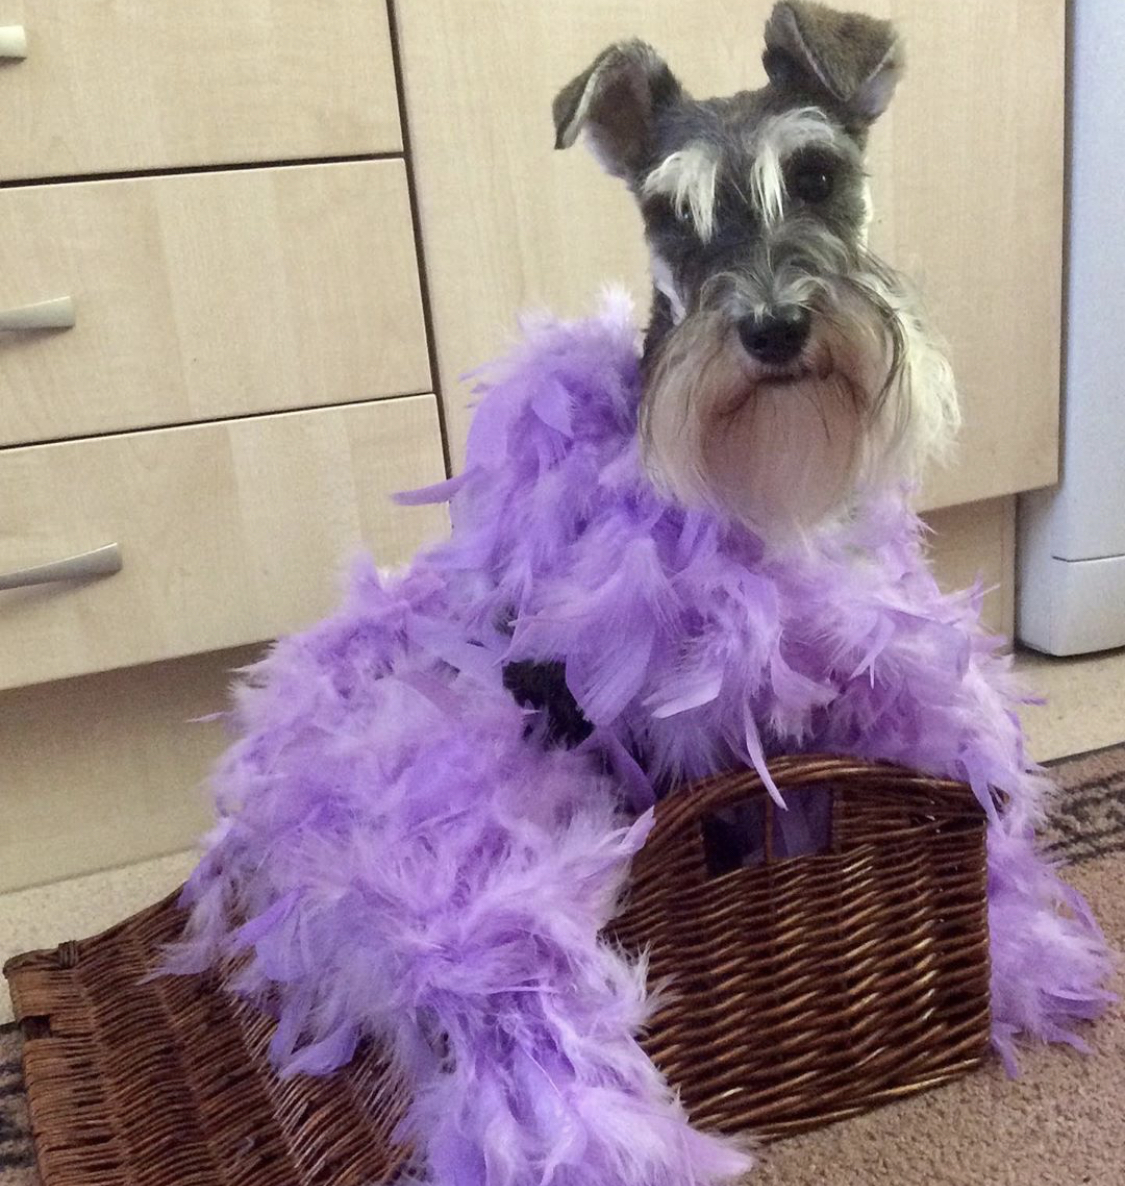 Schnauzer wearing purple feathered chicken outfit siting inside the basket